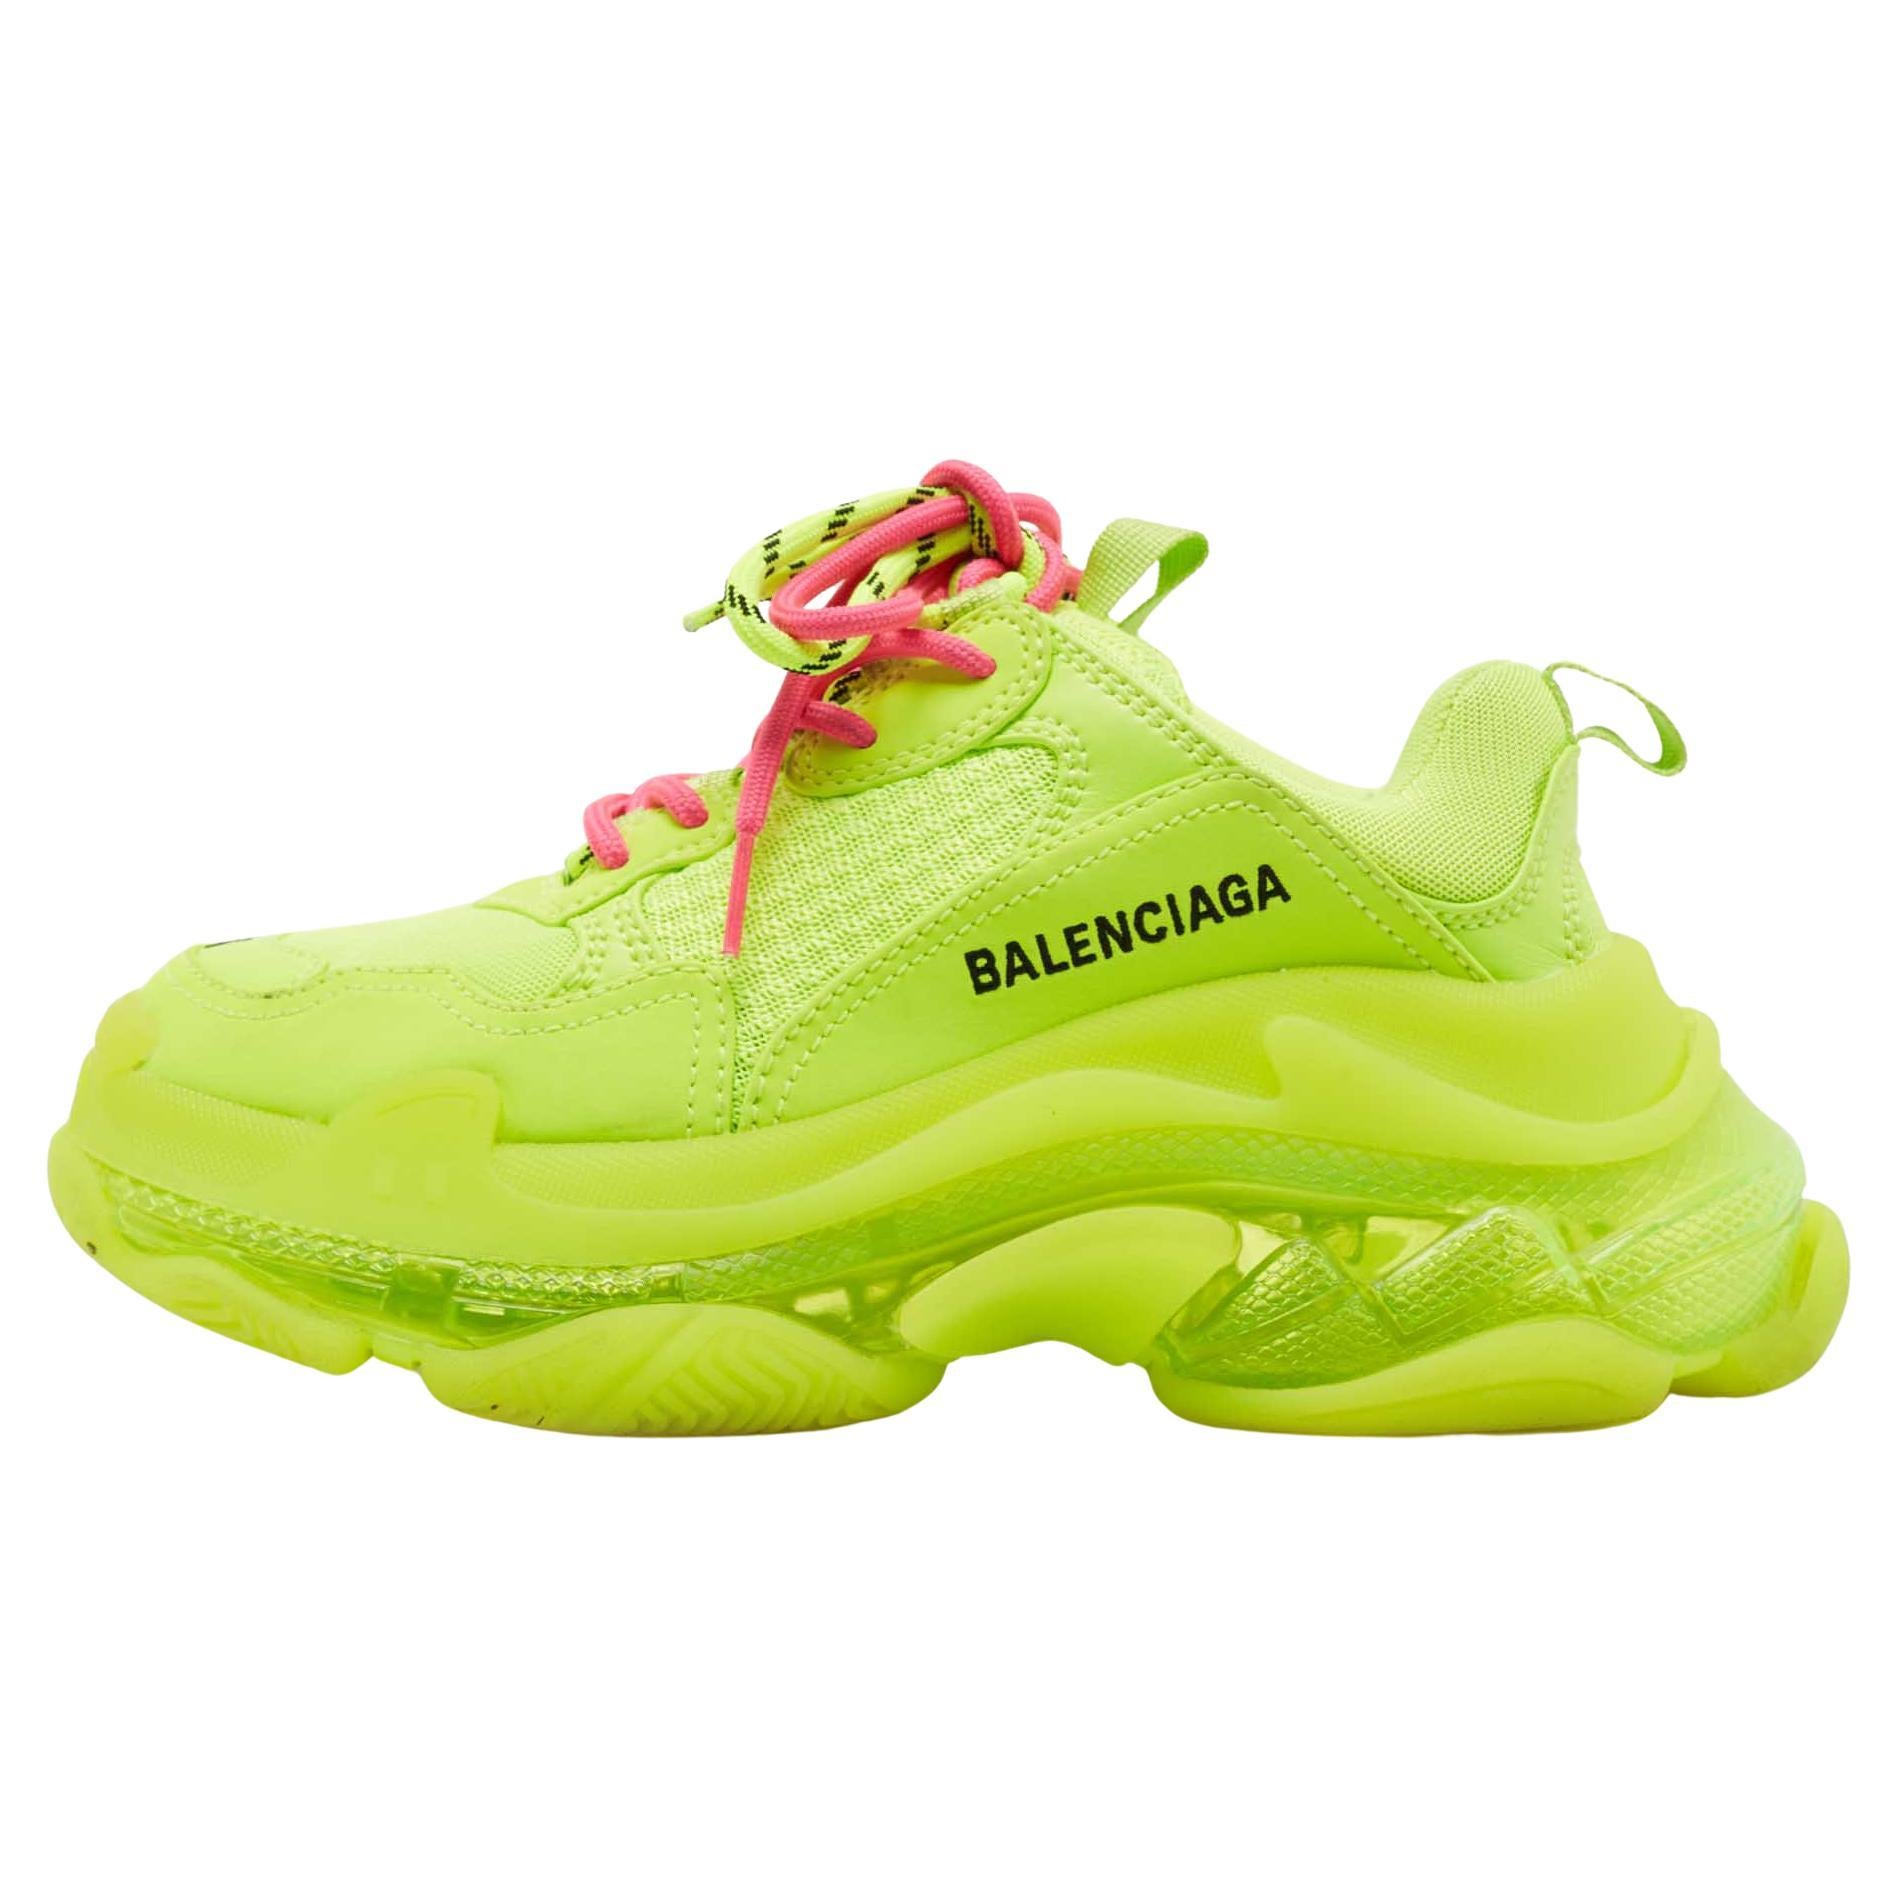 Balenciaga Neon Green Leather and Mesh Triple S Clear Sneakers Size 36